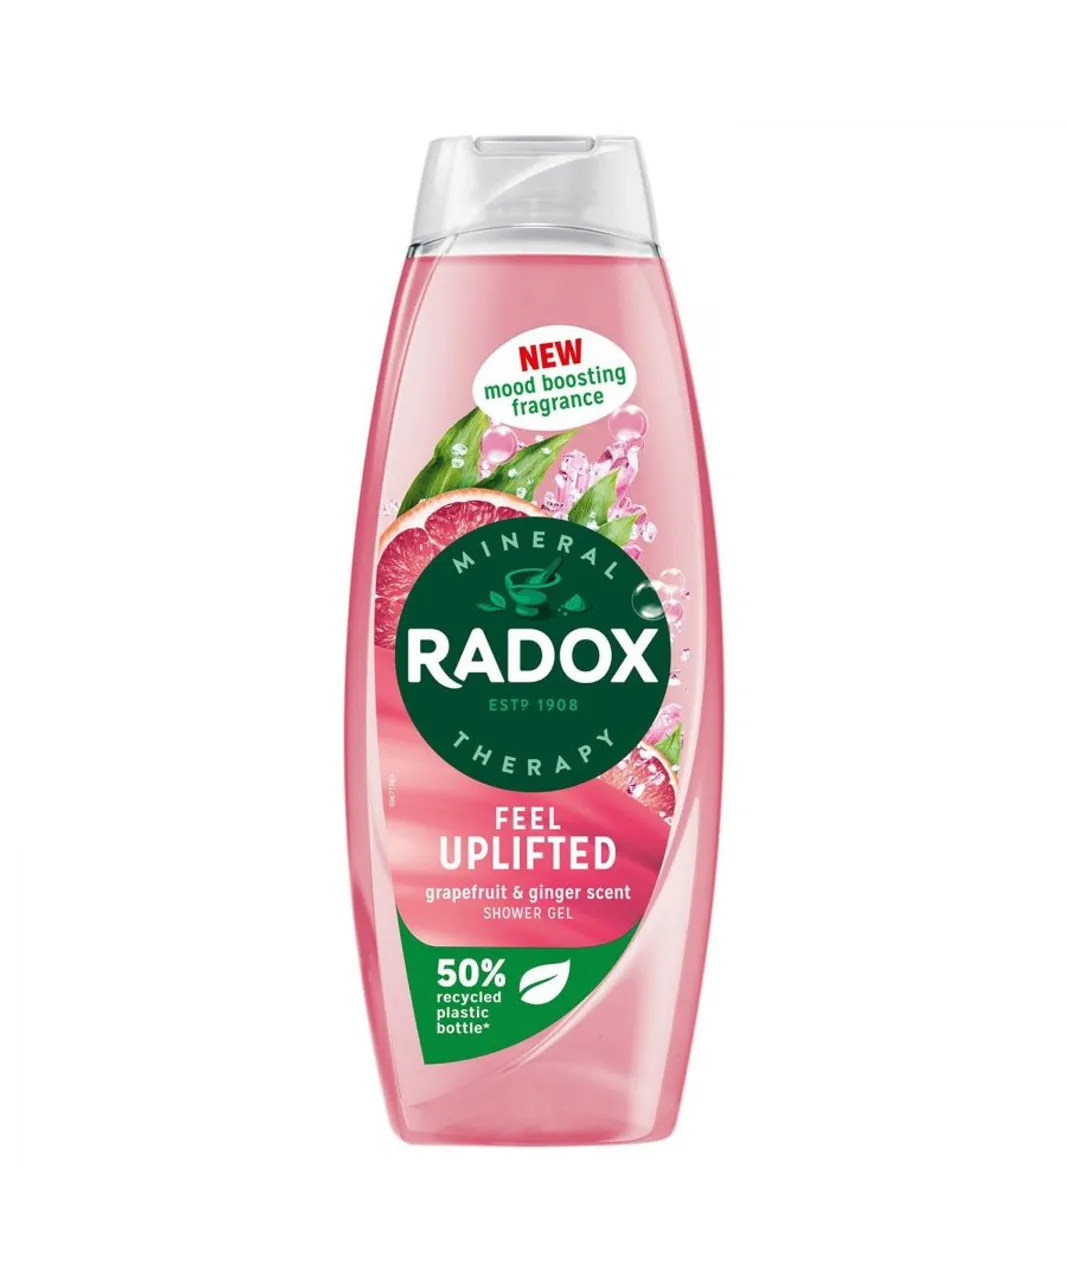 Radox Womens Shower Gel Feel Uplifted With Grapefruit & Ginger Scent 675 ml, 6 Pack - NA - One Size